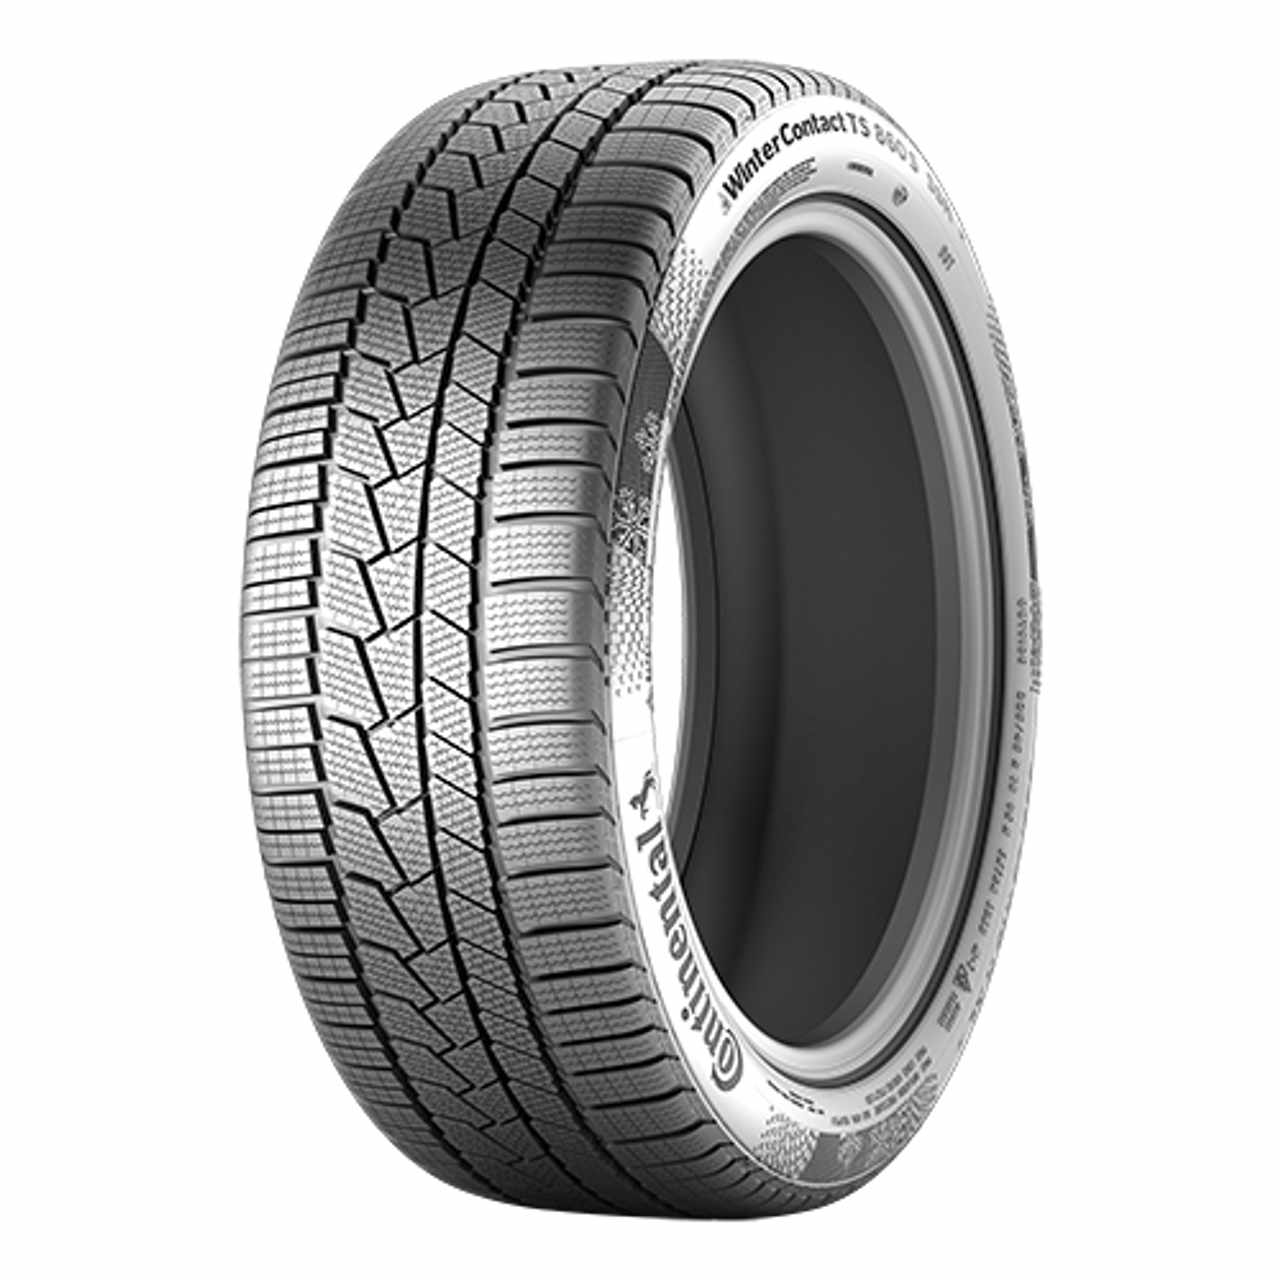 CONTINENTAL WINTERCONTACT TS 860 S (AO) (EVc) 235/45R18 94V FR BSW von Continental